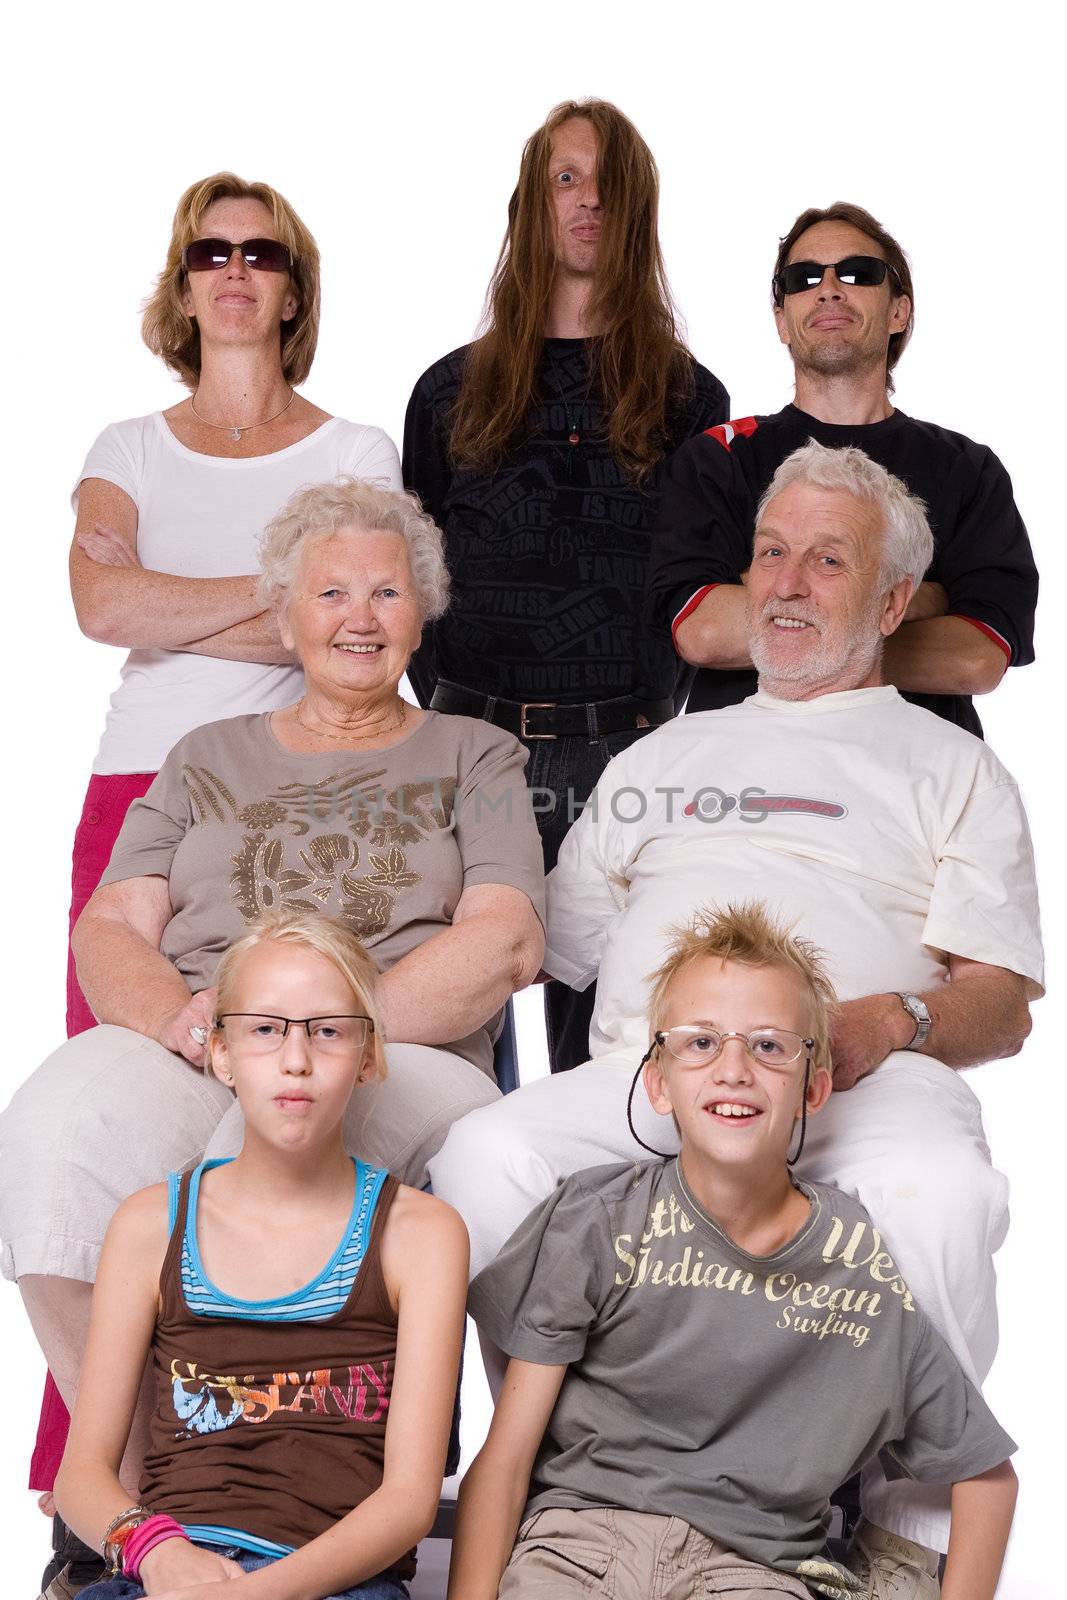 Studio family portrait of a funny family of 3 generations